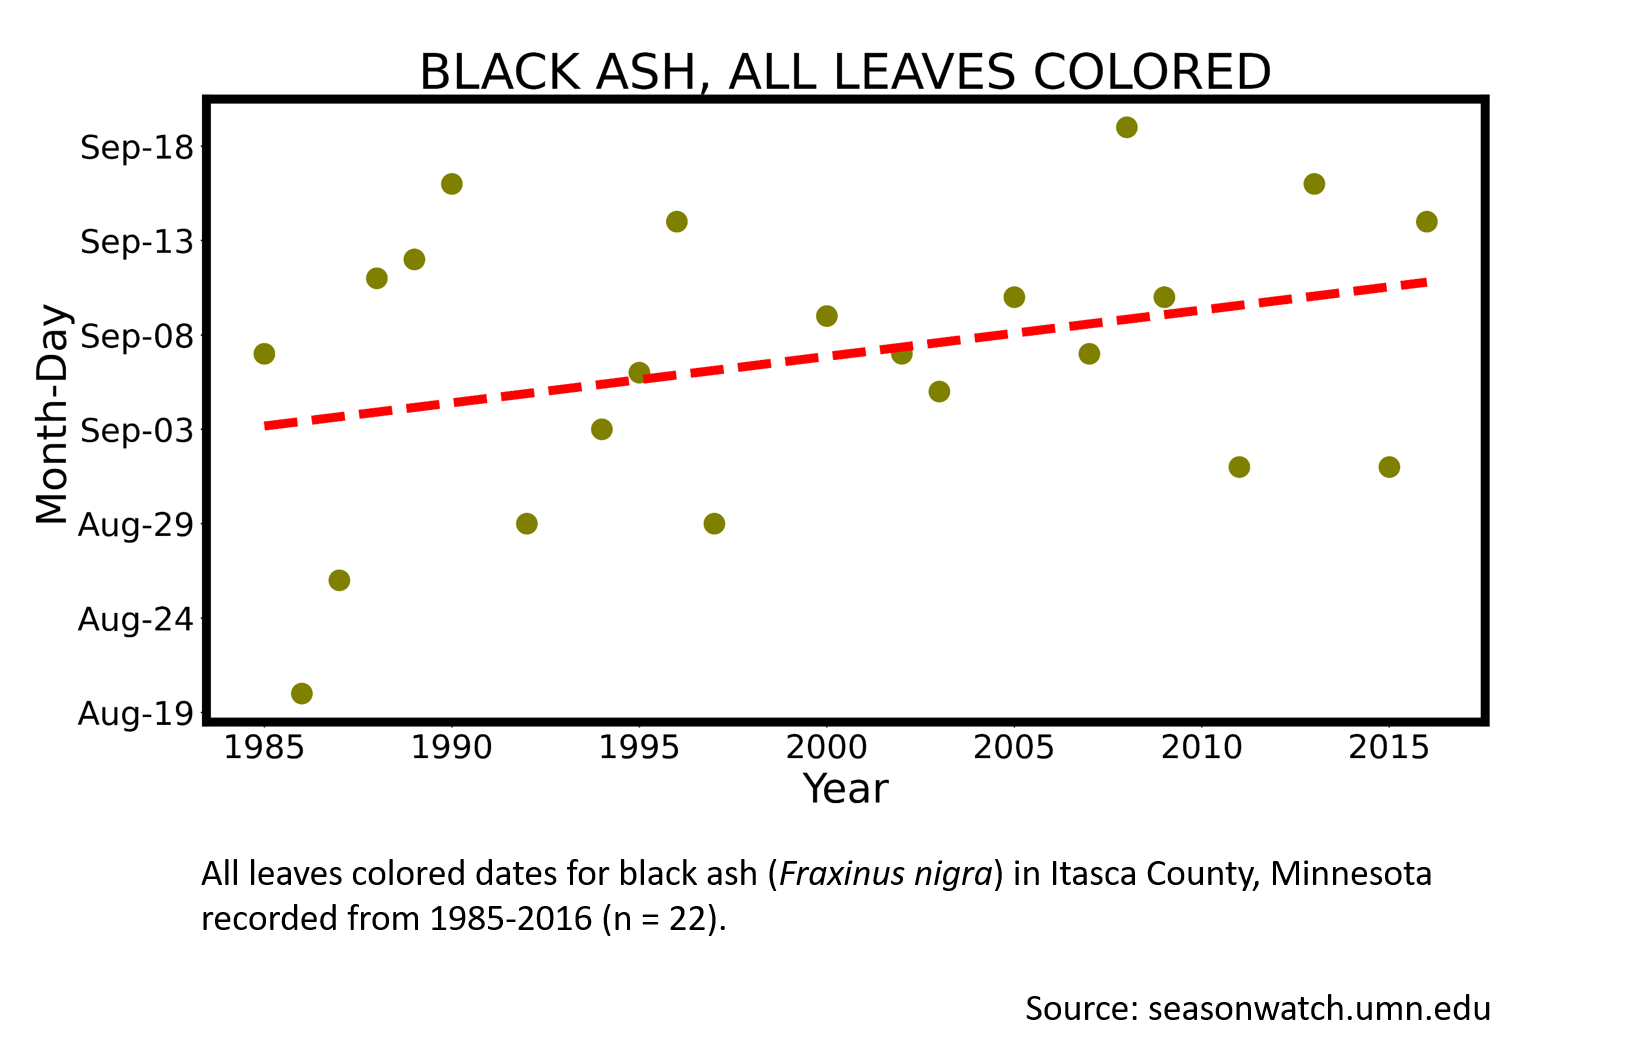 Scatterplot showing black ash phenology in Itasca County, Minnesota